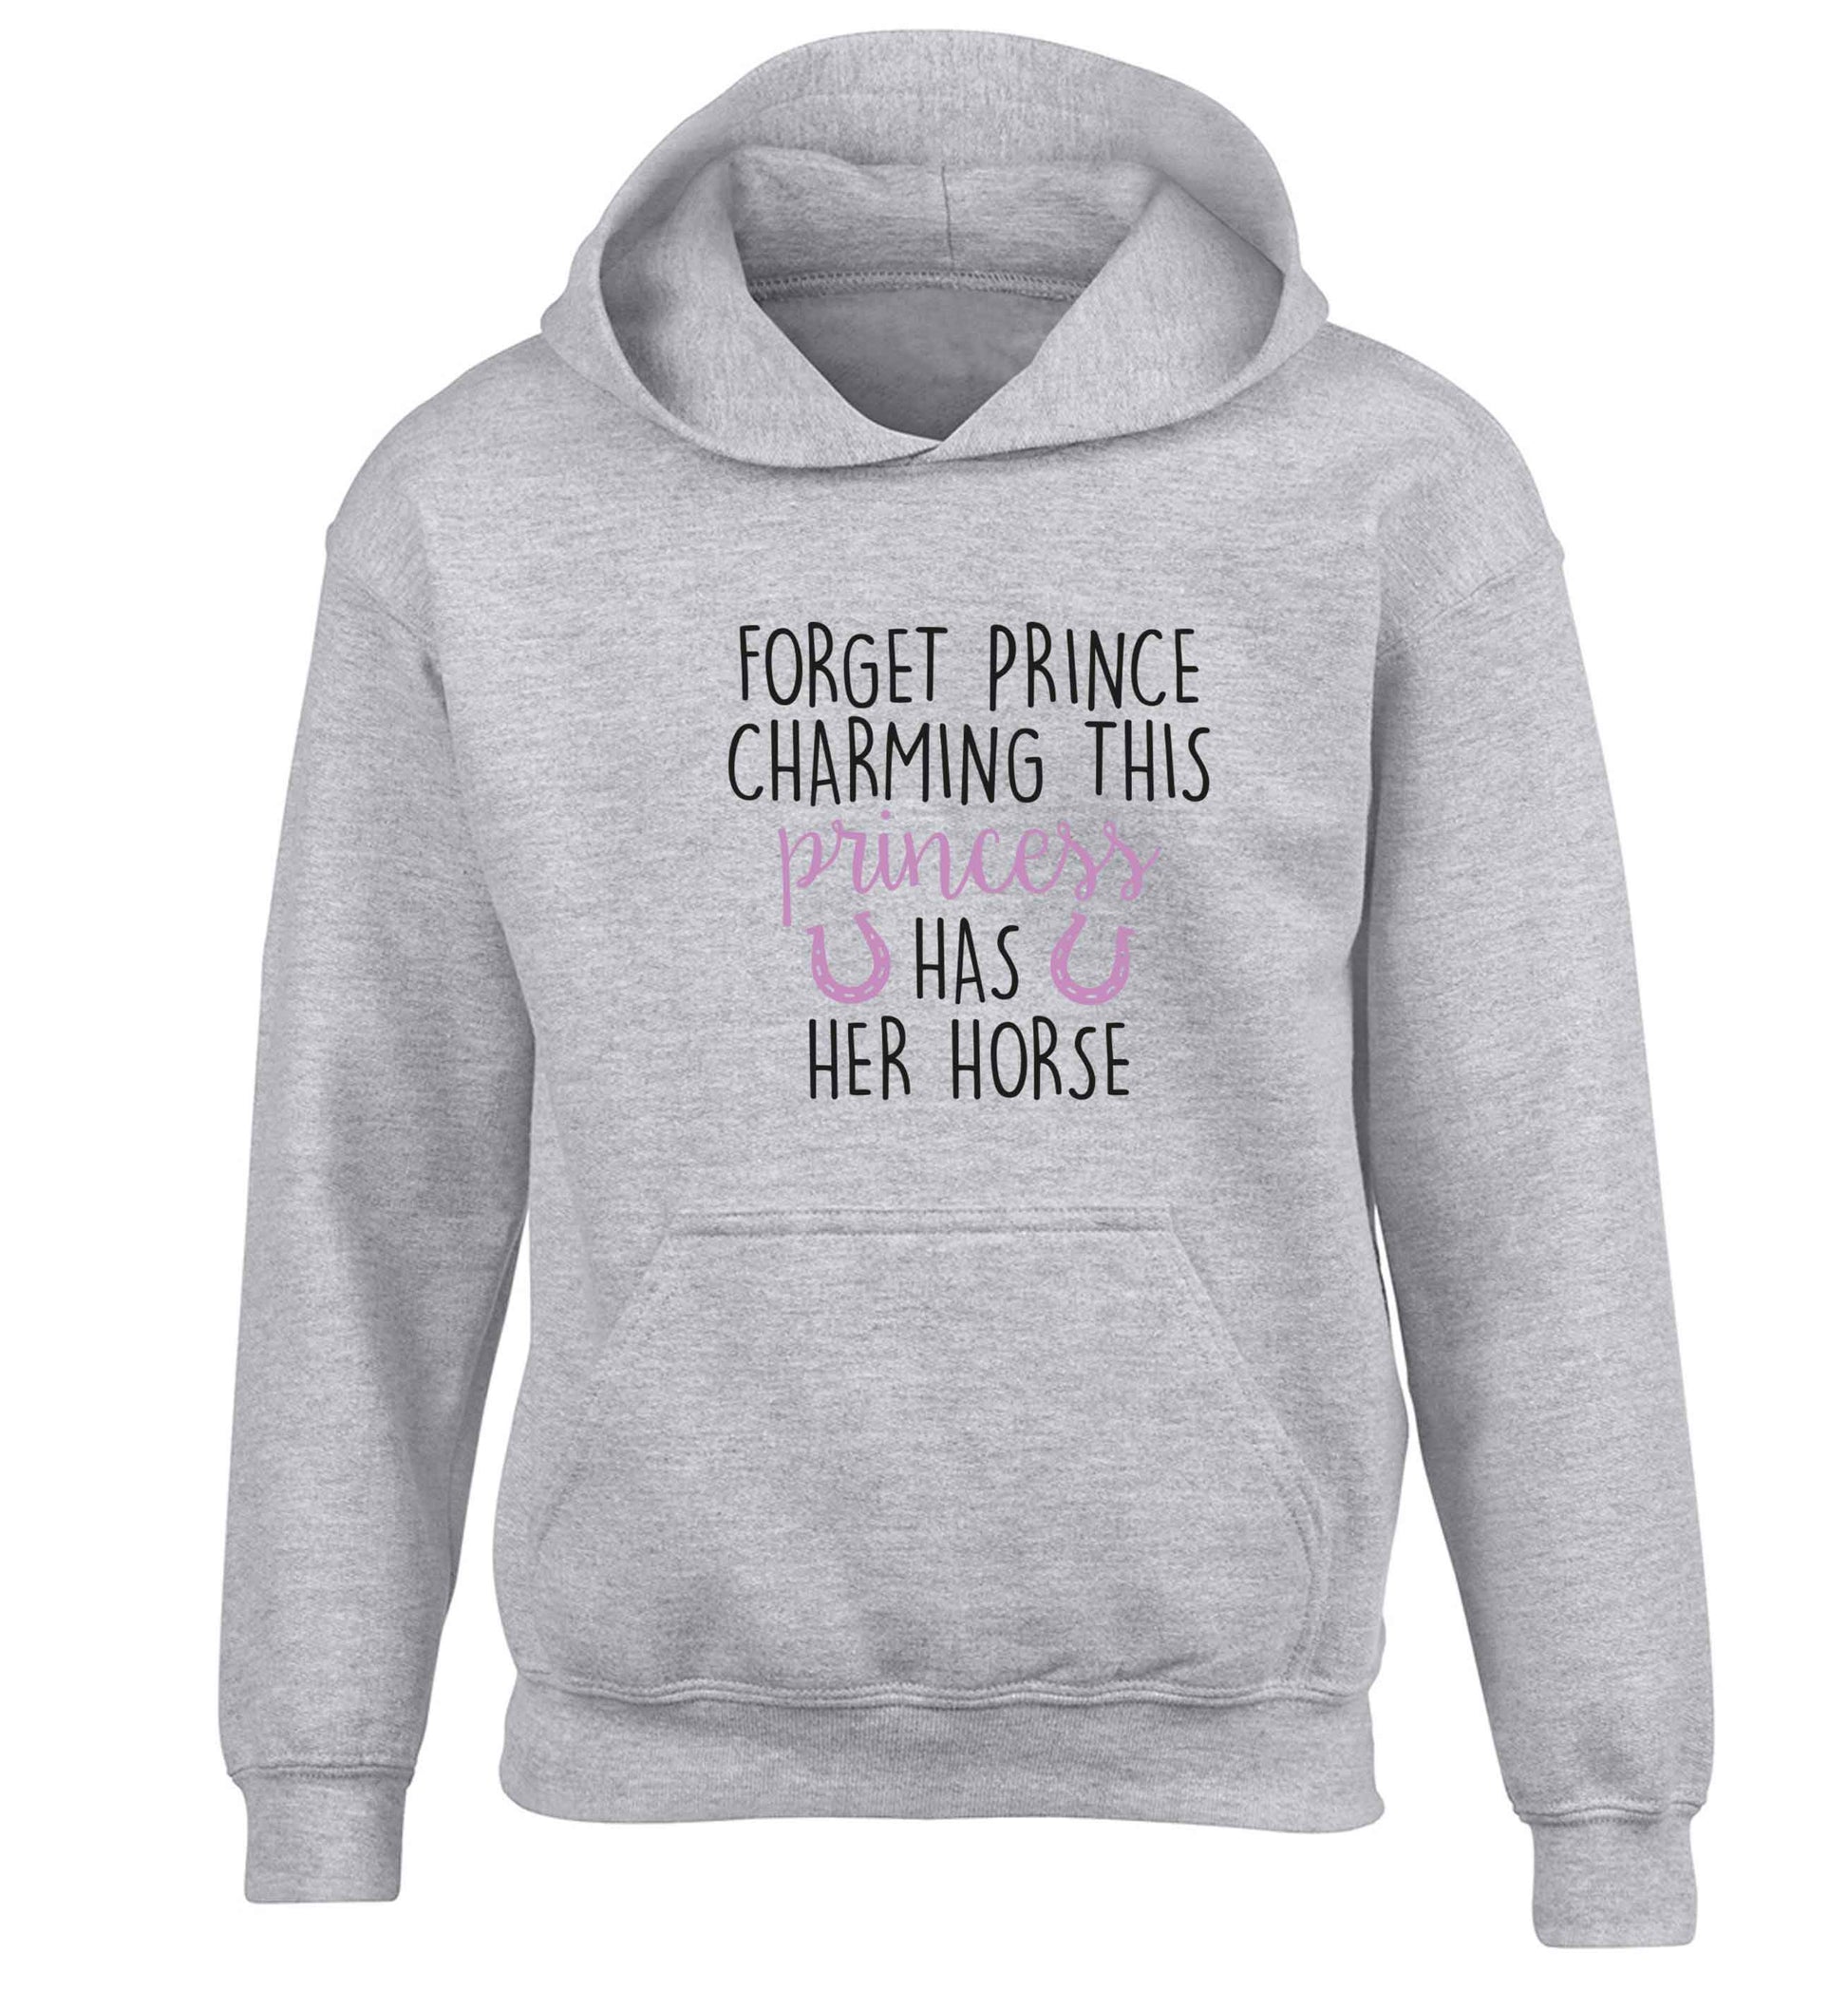 Forget prince charming this princess has her horse children's grey hoodie 12-13 Years